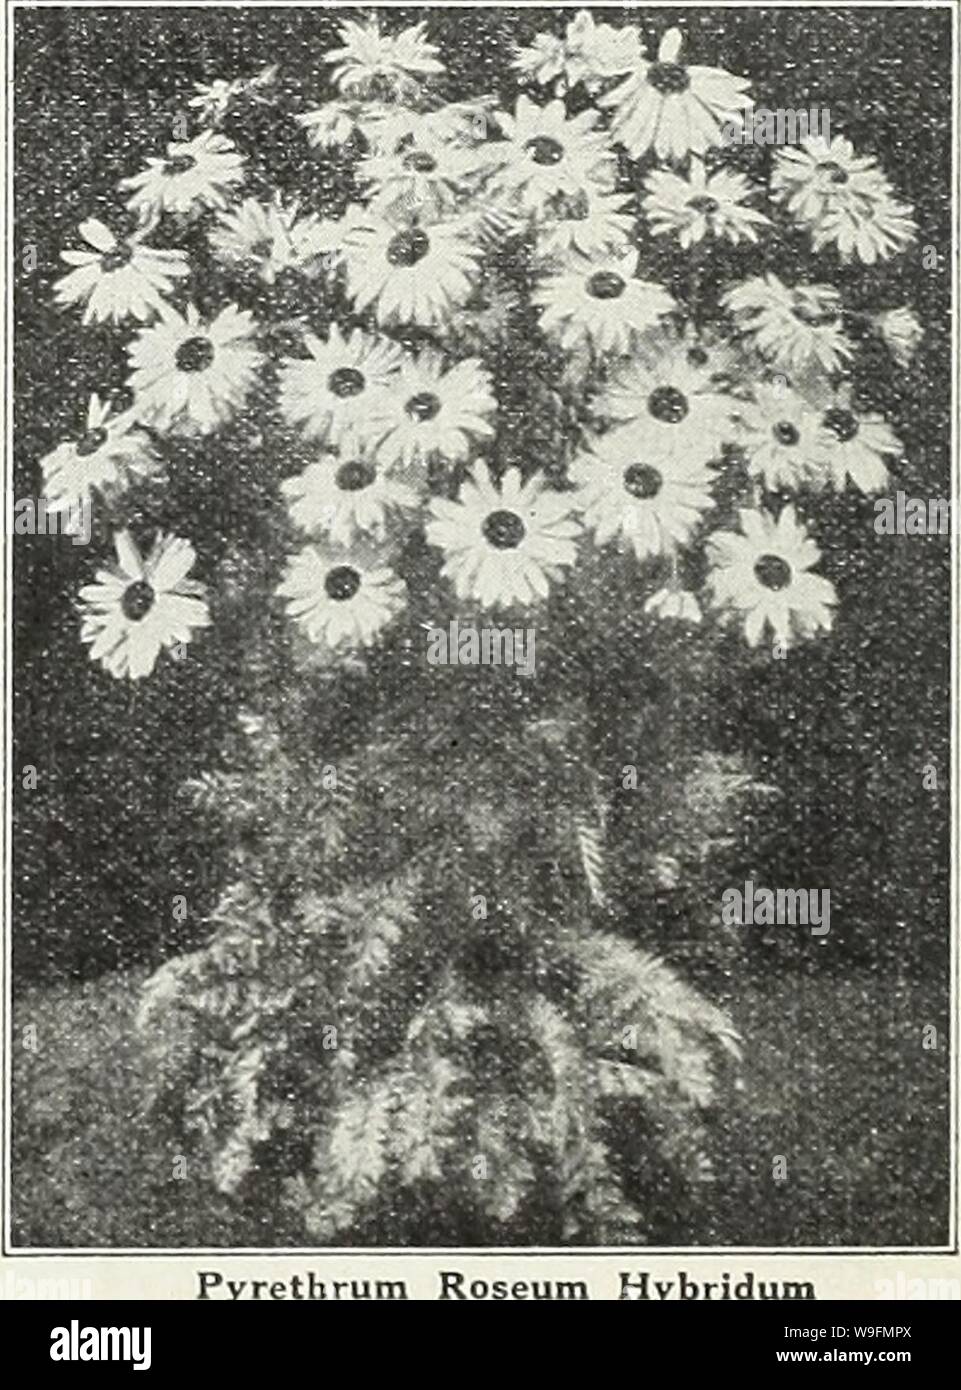 Archive image from page 55 of Currie Bros  fifty-eighth year. Currie Bros. : fifty-eighth year 1933  curriebrosfiftye19curr Year: 1933 ( HARDY PREVIROSES Hardy Primrose PYRETHRUM The hardy Primroses flowers. They require ; the rock garden. PRIMULA JAPONICA HYBRIDA—A magnificent strain of hardy Japanese Primroses. The colors range from pure white, through shades of pink to deep crimson. Seeds Pkt. 15c AURICULA (Primula Auricula)—Finest mixed. Seeds Pkt. 10c COWSLIP (Primula Veris)—Early spring flowering, finest mixed. Plants, price, each, 25c; Seeds Pkt. 10c POLYANTHUS (Primula Elatior)—Bunch-f Stock Photo